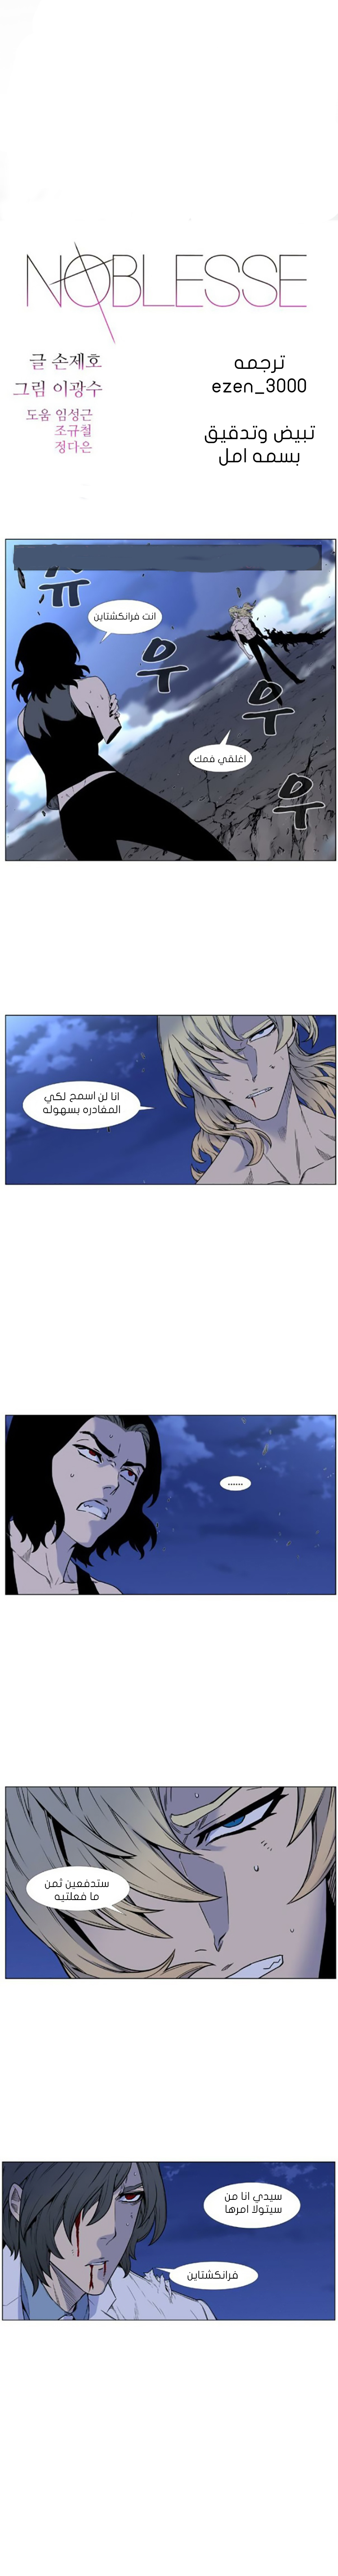 Noblesse: Chapter 448 - Page 1